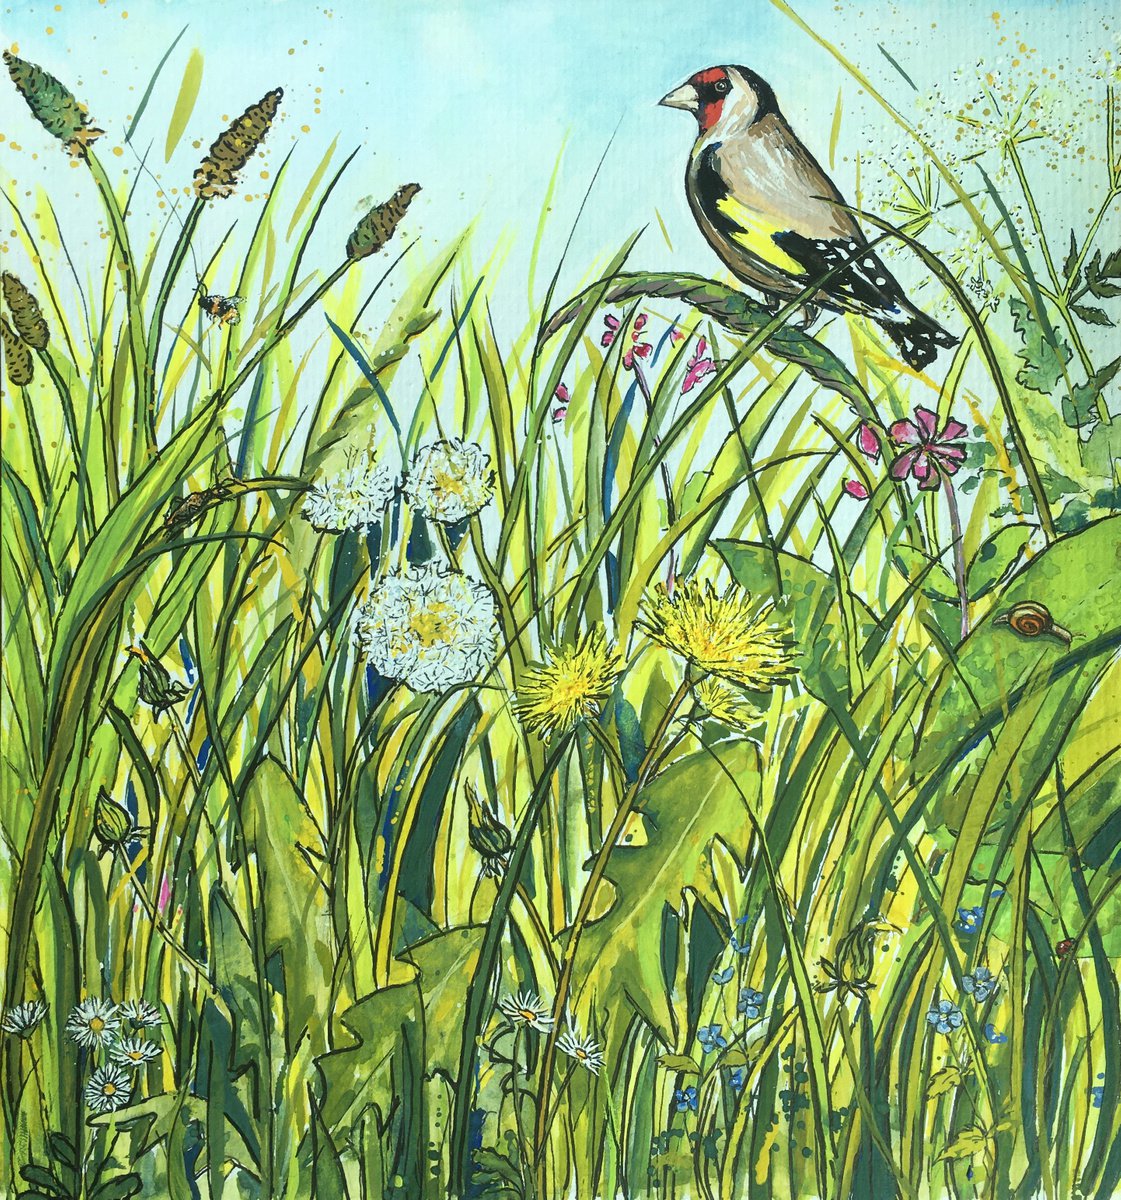 Goldfinch and Dandelions by Lucy Smerdon